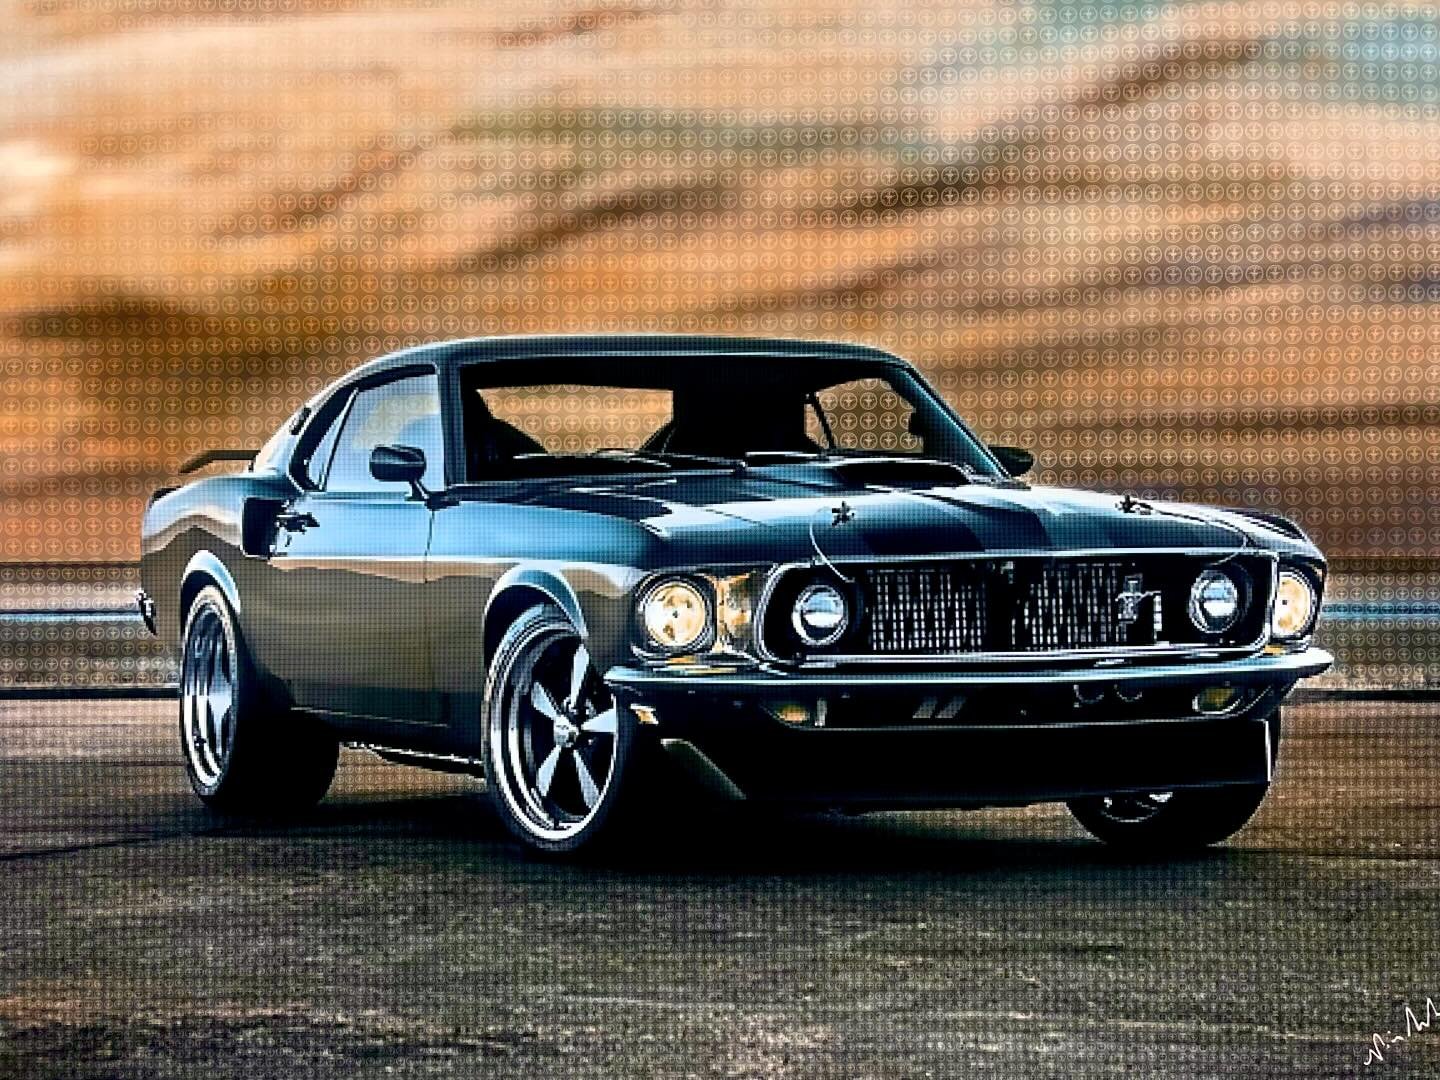 Here&rsquo;s a new piece I&rsquo;ve just finished. It&rsquo;s a Mustang Boss 429, what a beast! This is the car Keanu Reeves drives in John Wick. My publisher collected this on Thursday and it&rsquo;s now available. Hope you like!! 
-
-
-
-
#fordmust